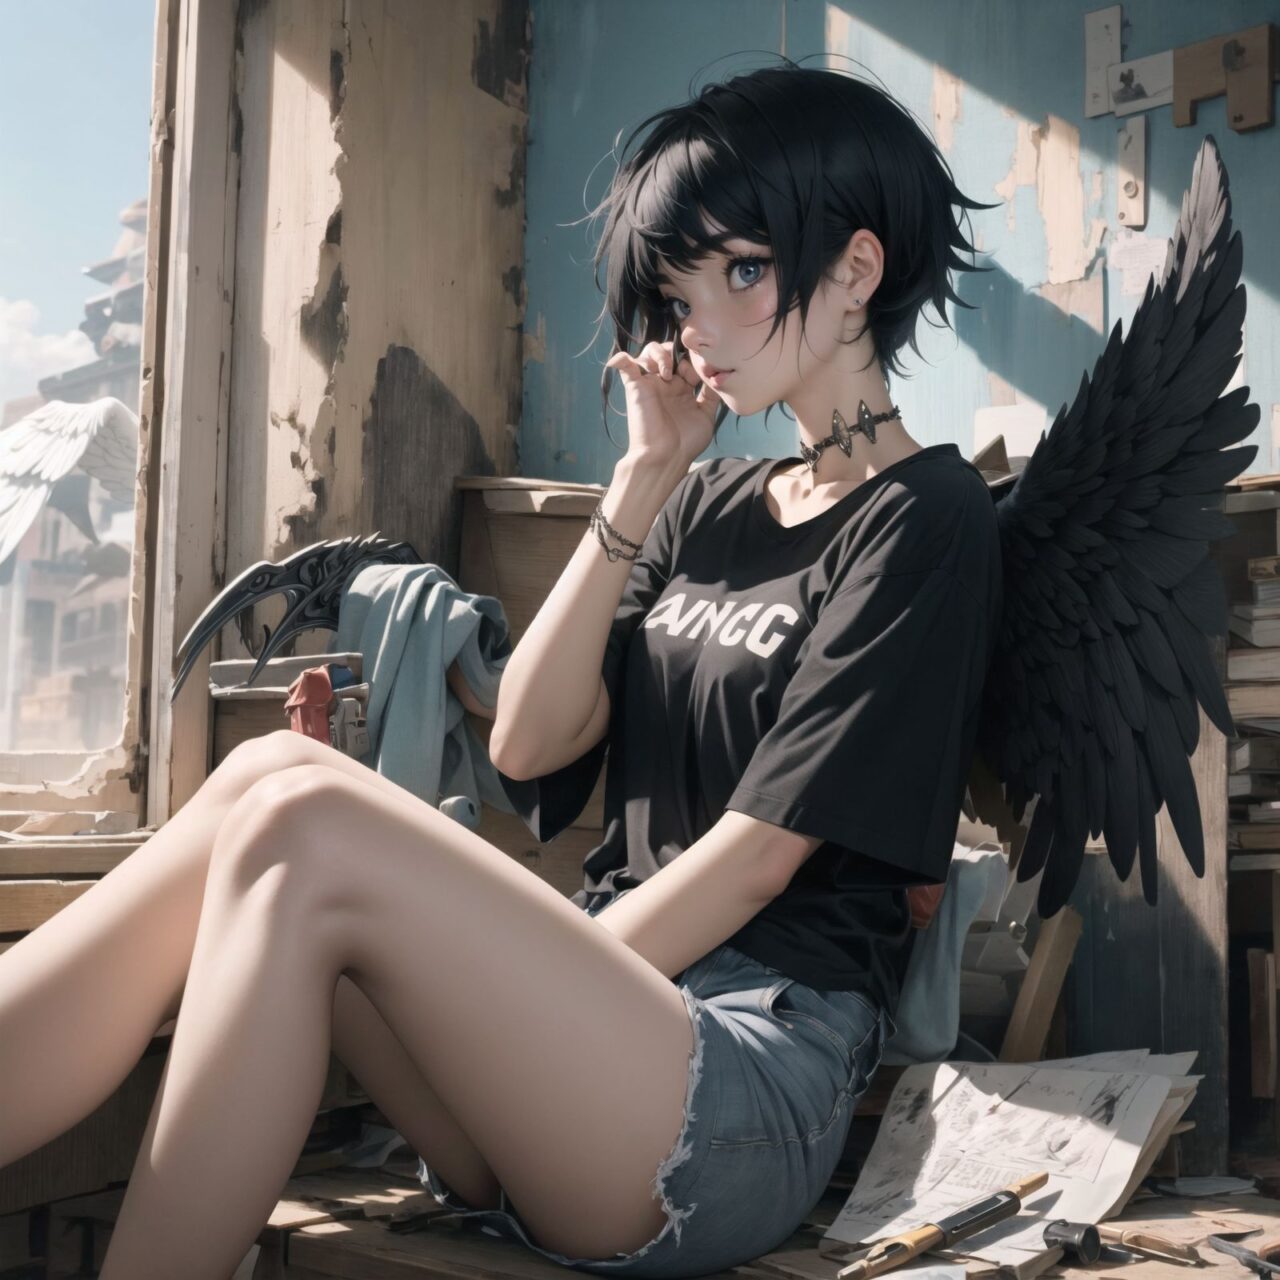 (Emo black angel: 1.5), angel rings and wings,
A girl is depicted in detail sitting in a cluttered room.
She is wearing a black T-shirt and shorts and has a lethargic expression on her face.
In the background are various notes and tools, as well as a bright yellow wall with a blue sky seen through the window, creating an ennui and chaotic atmosphere,